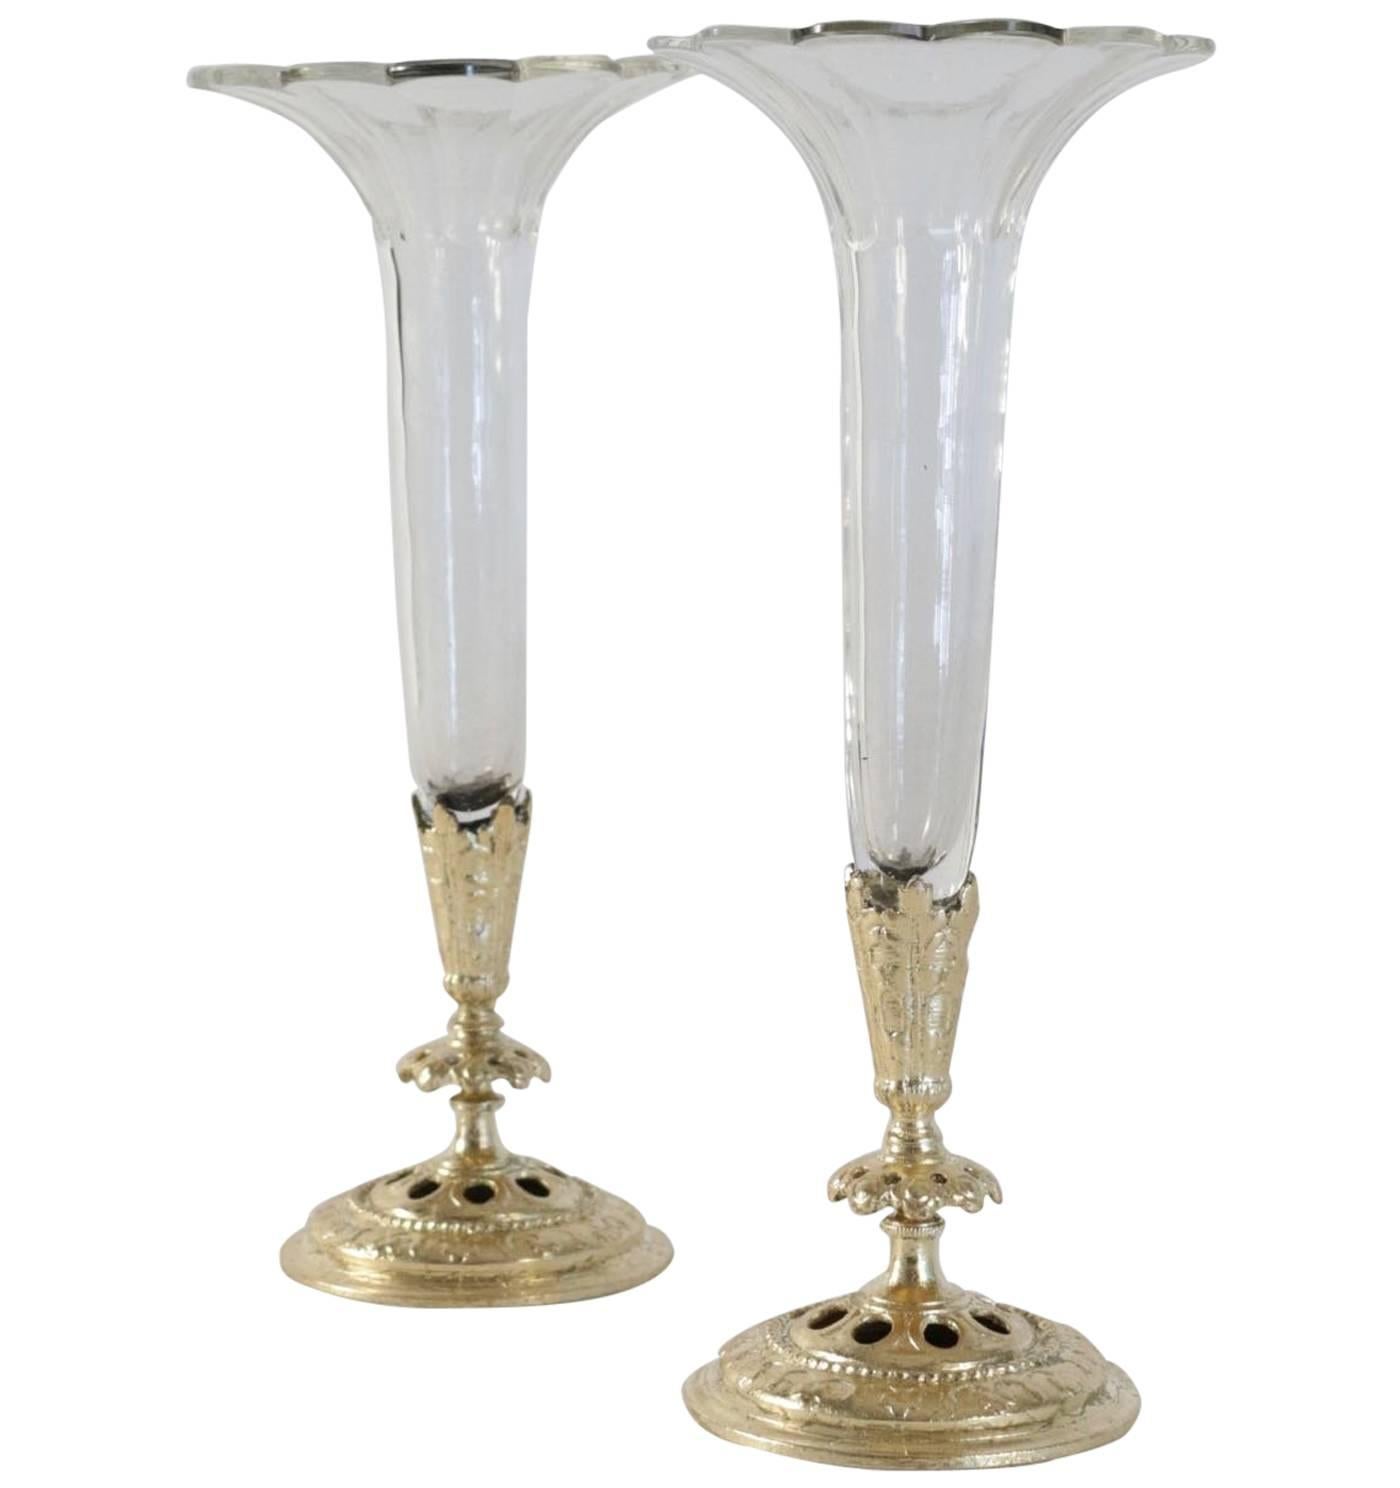 Pair of Bud Vases, Cristal and Gold Gilt Bronze and Gold Leaf